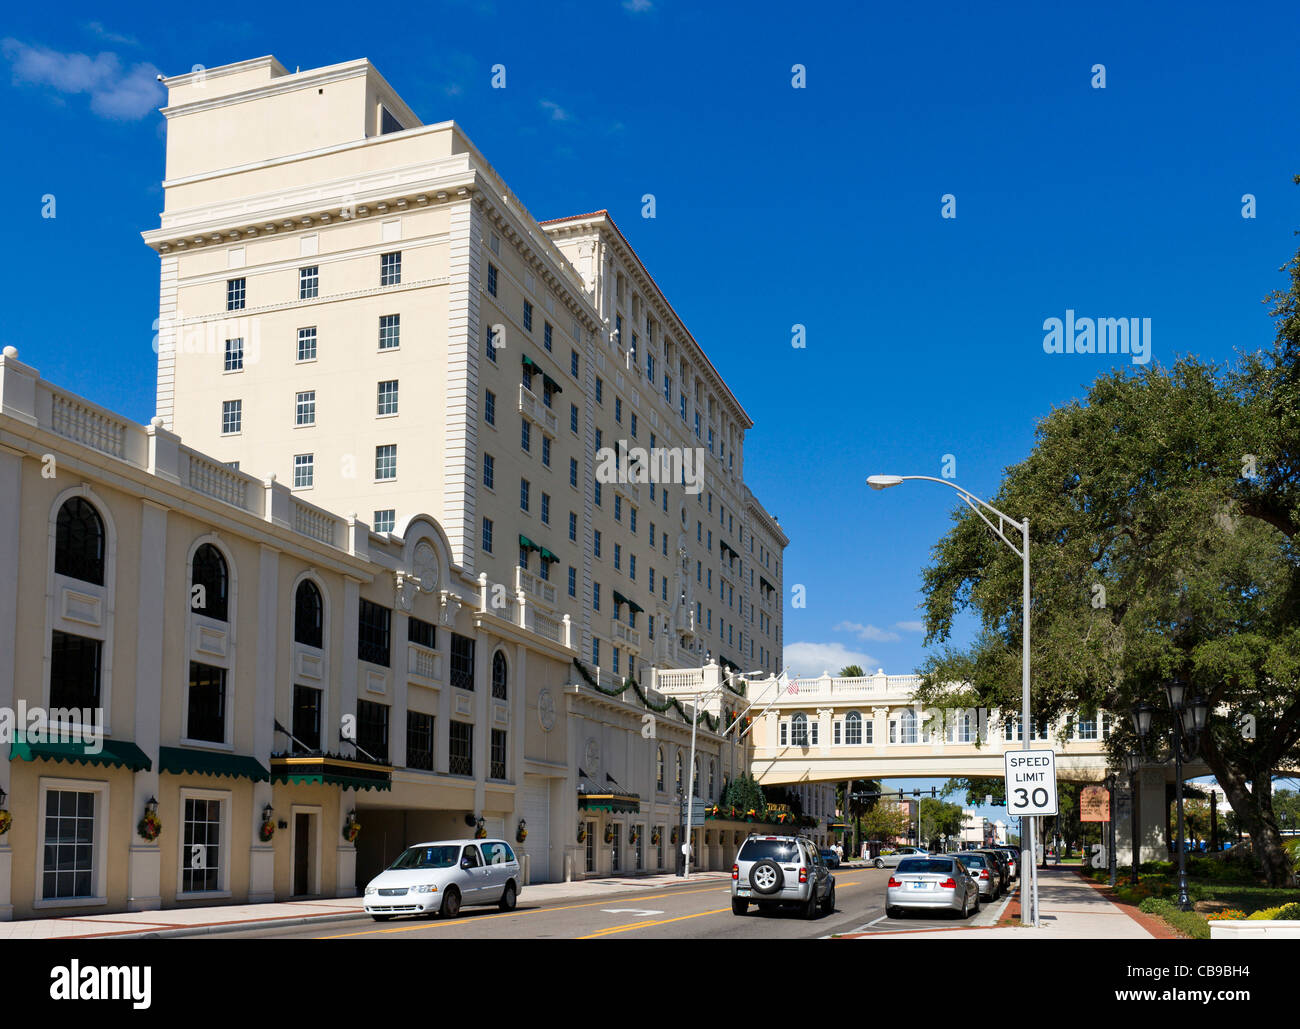 The Fort Harrison Hotel, Ft Harrison Ave, Clearwater, spiritual headquarters and mecca of Church of Scientology, Florida, USA Stock Photo